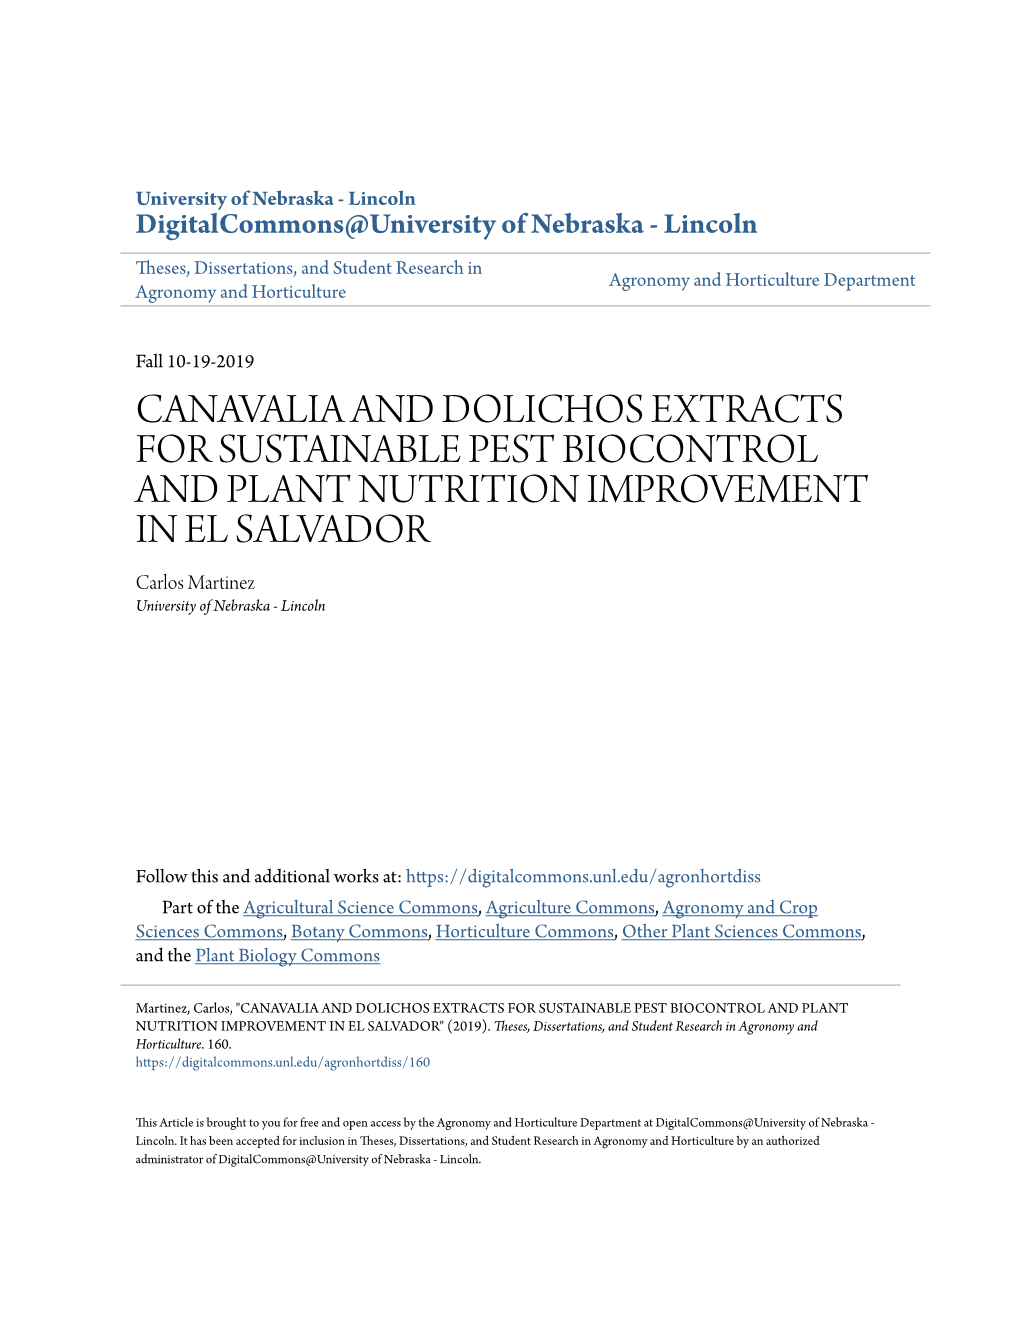 CANAVALIA and DOLICHOS EXTRACTS for SUSTAINABLE PEST BIOCONTROL and PLANT NUTRITION IMPROVEMENT in EL SALVADOR Carlos Martinez University of Nebraska - Lincoln